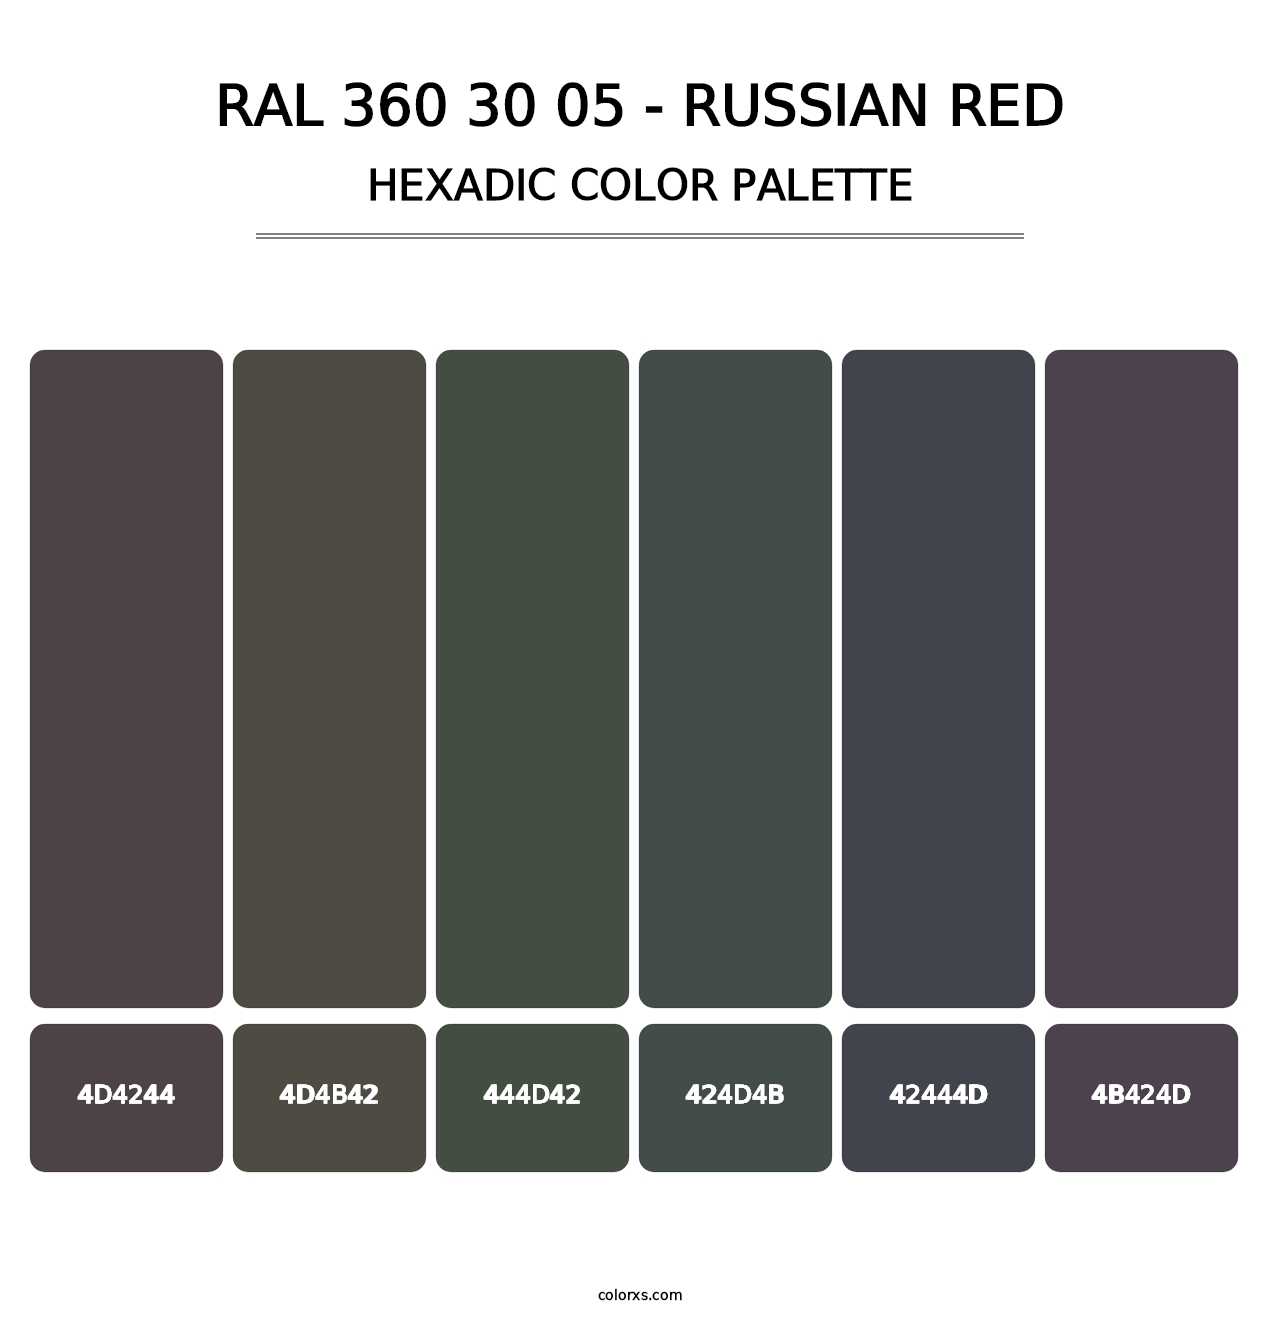 RAL 360 30 05 - Russian Red - Hexadic Color Palette